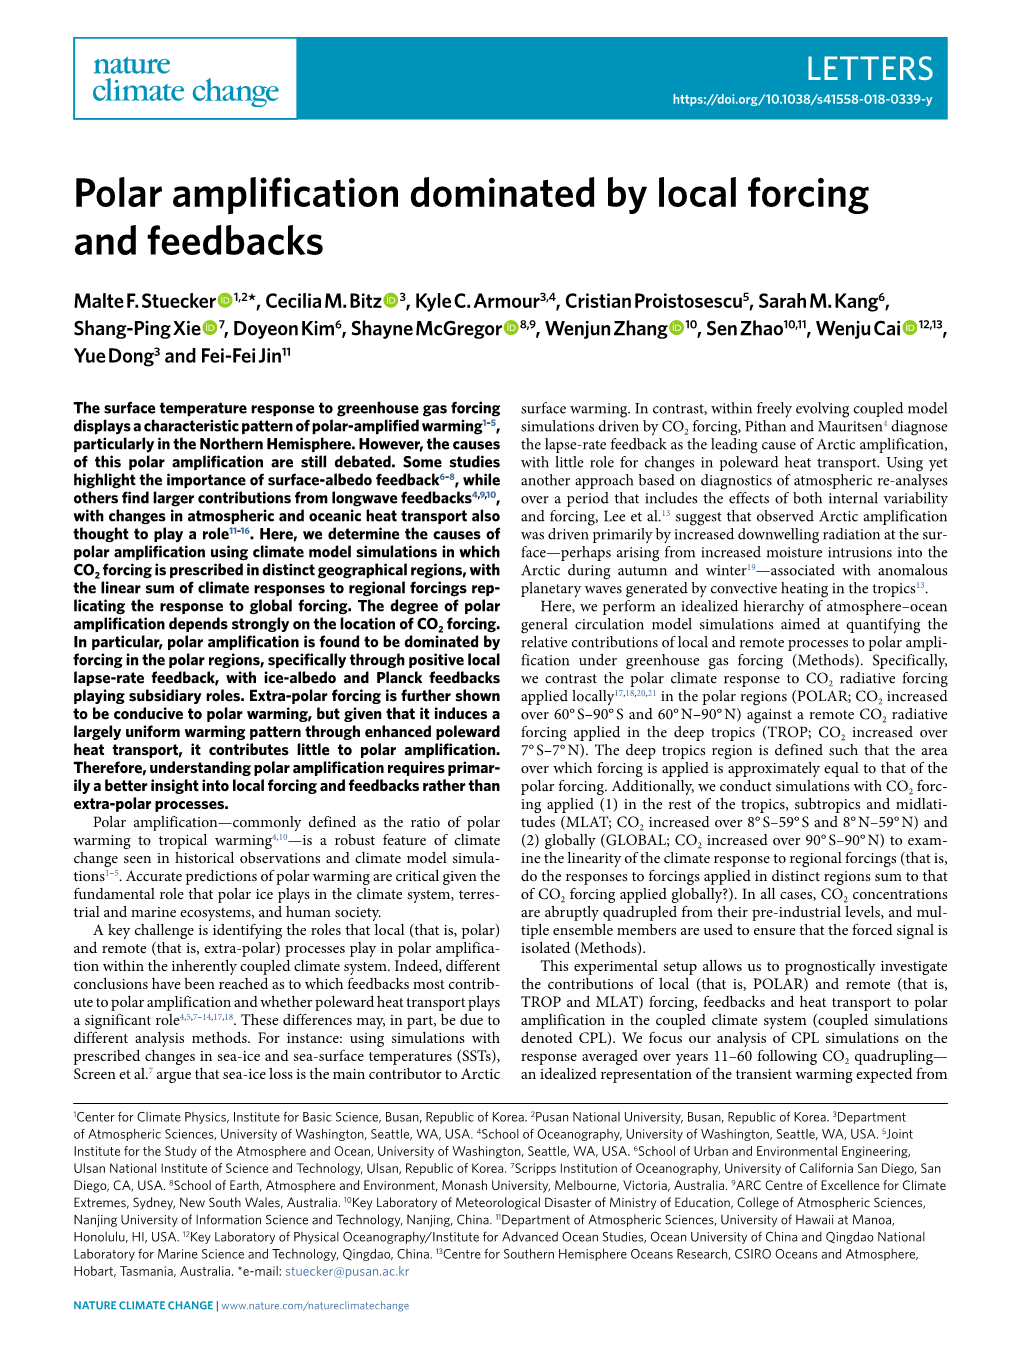 Polar Amplification Dominated by Local Forcing and Feedbacks